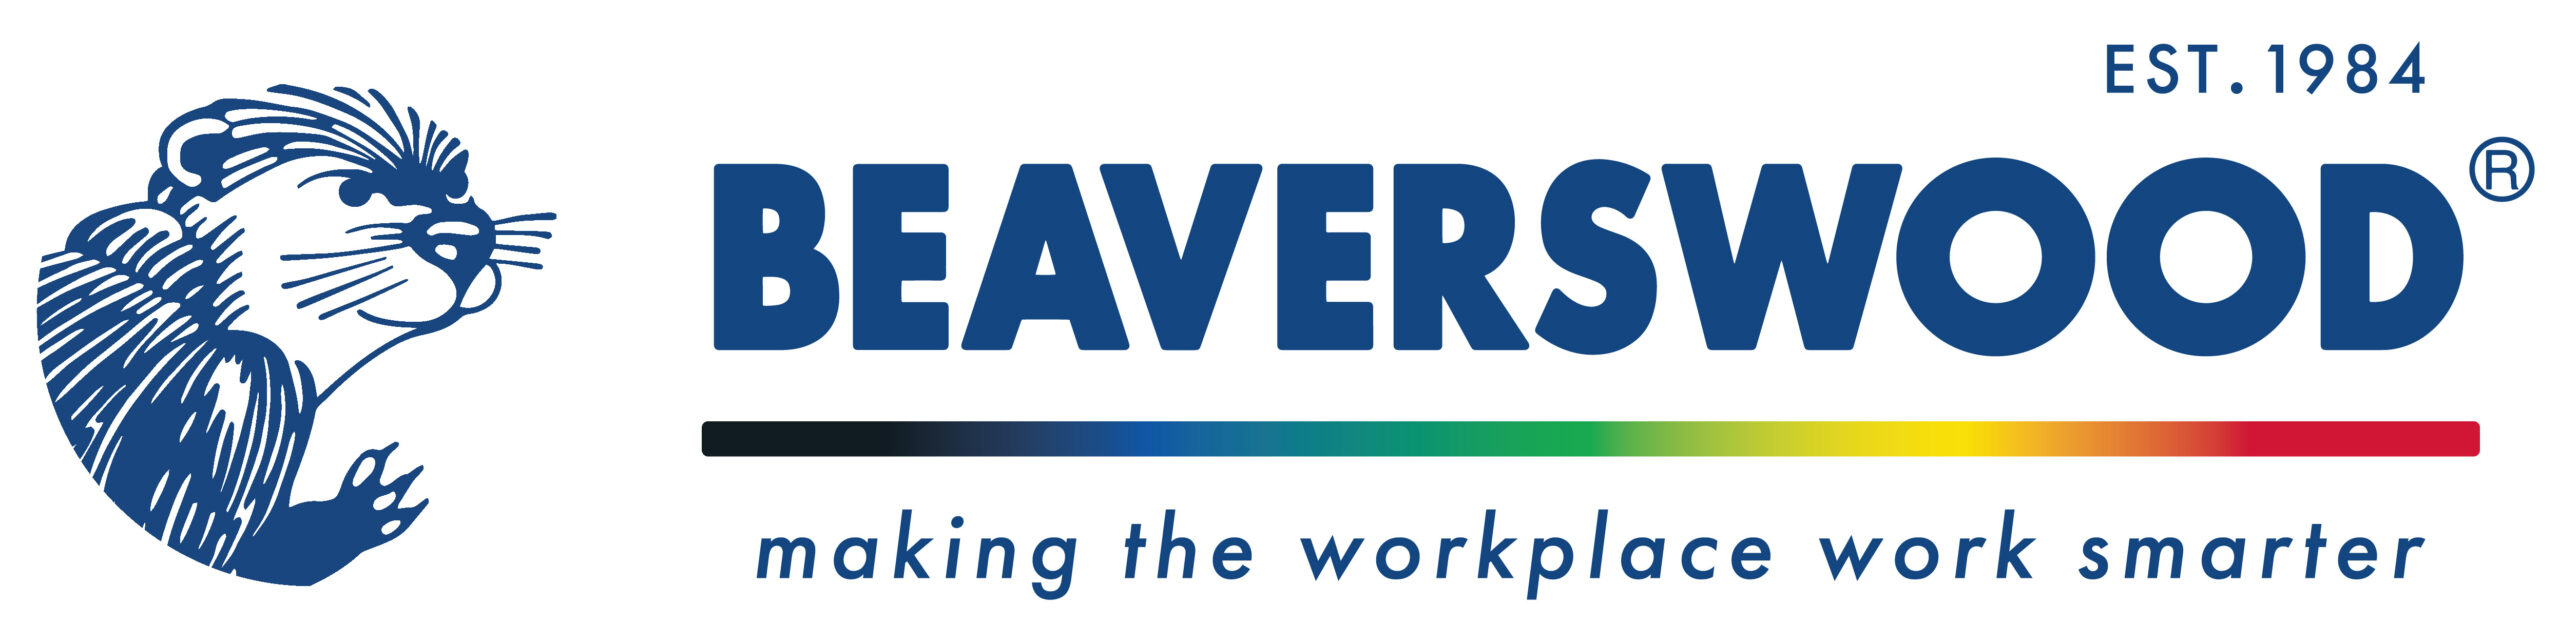 beaverswood new logo making the workplace work smarter since 1984